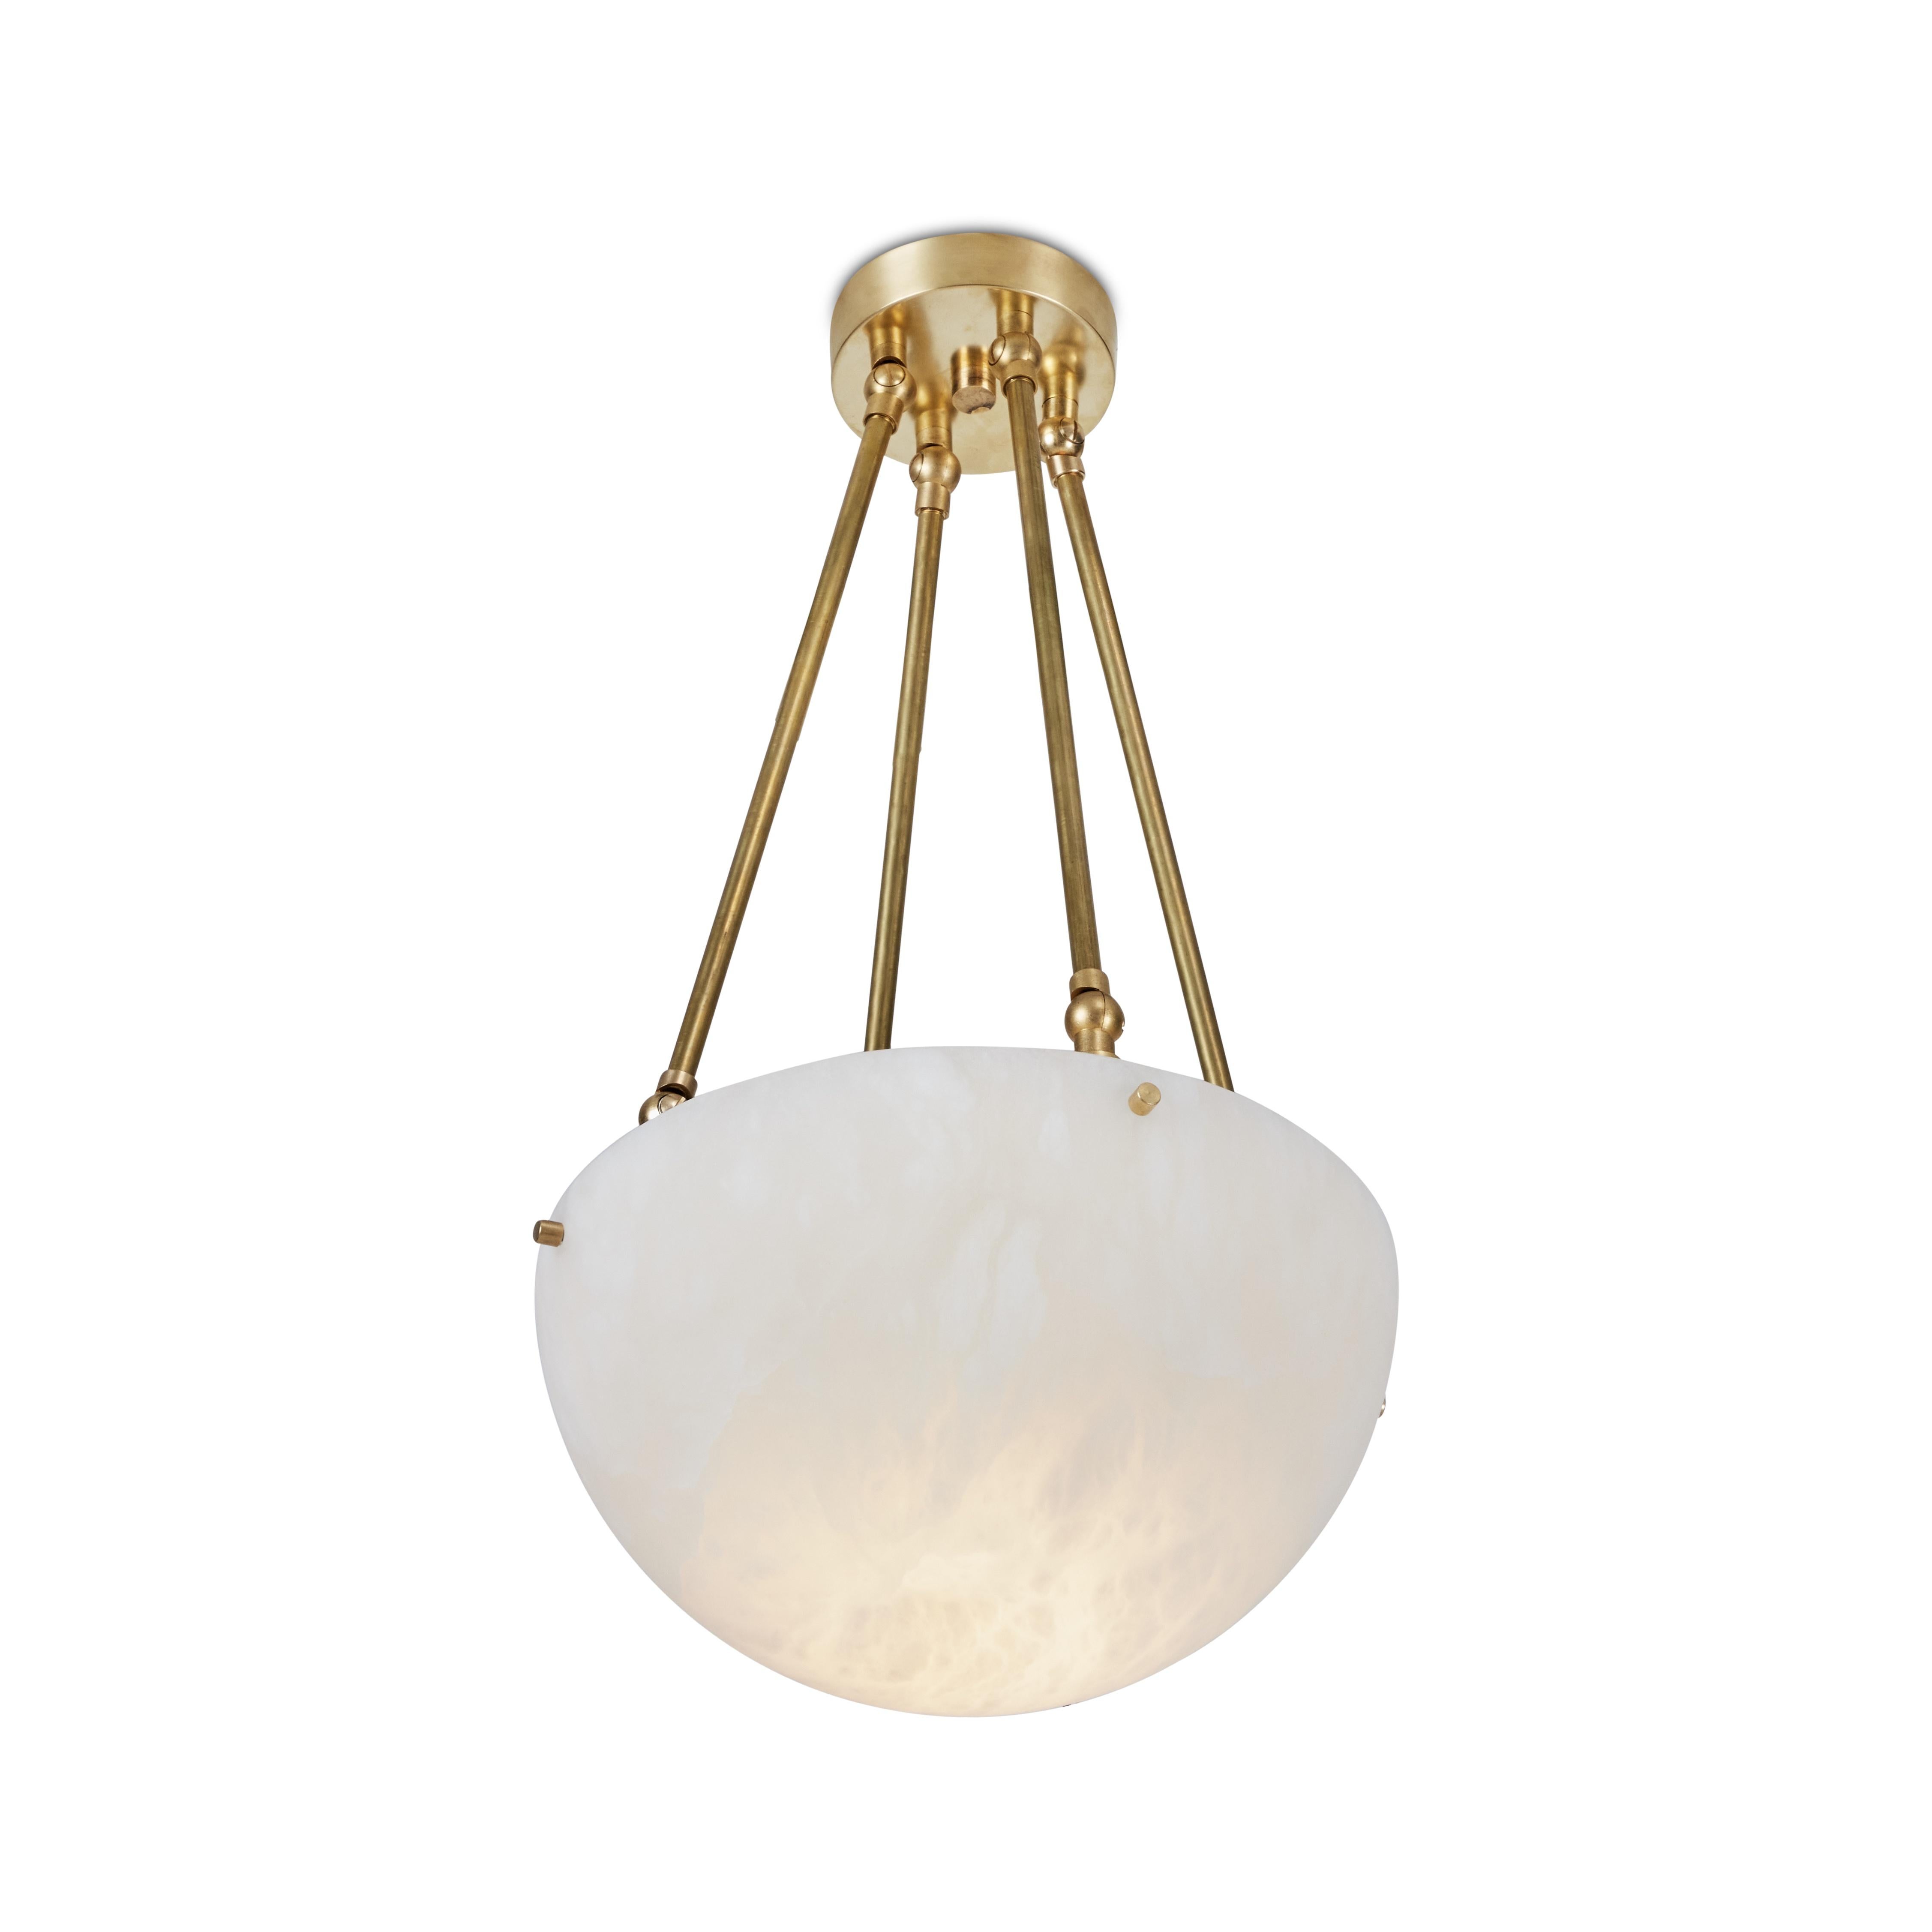 'Moon' Alabaster and brass pendant lamp by Denis de la Mesiere. Handcrafted in Los Angeles in the workshop of noted French designer and antiques dealer Denis de le Mesiere, who meticulously pays homage to the work of Pierre Chareau with scrupulous